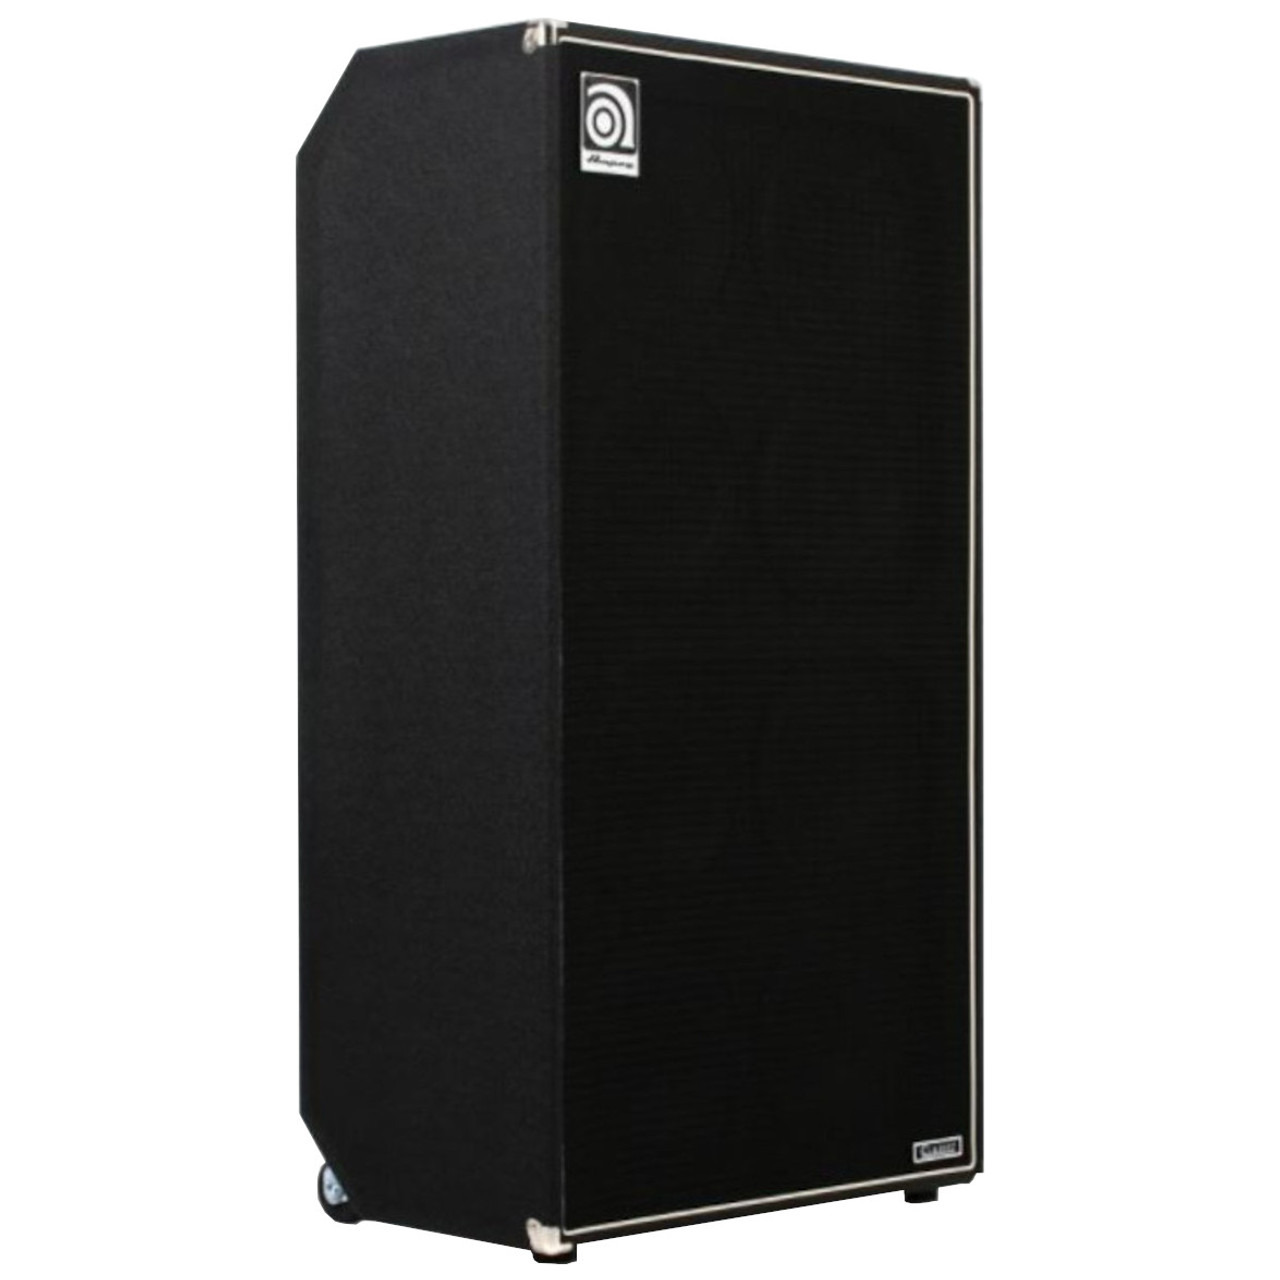 Ampeg SVT-810E 8x10-Inch 800W Bass Cabinet - Sound Productions